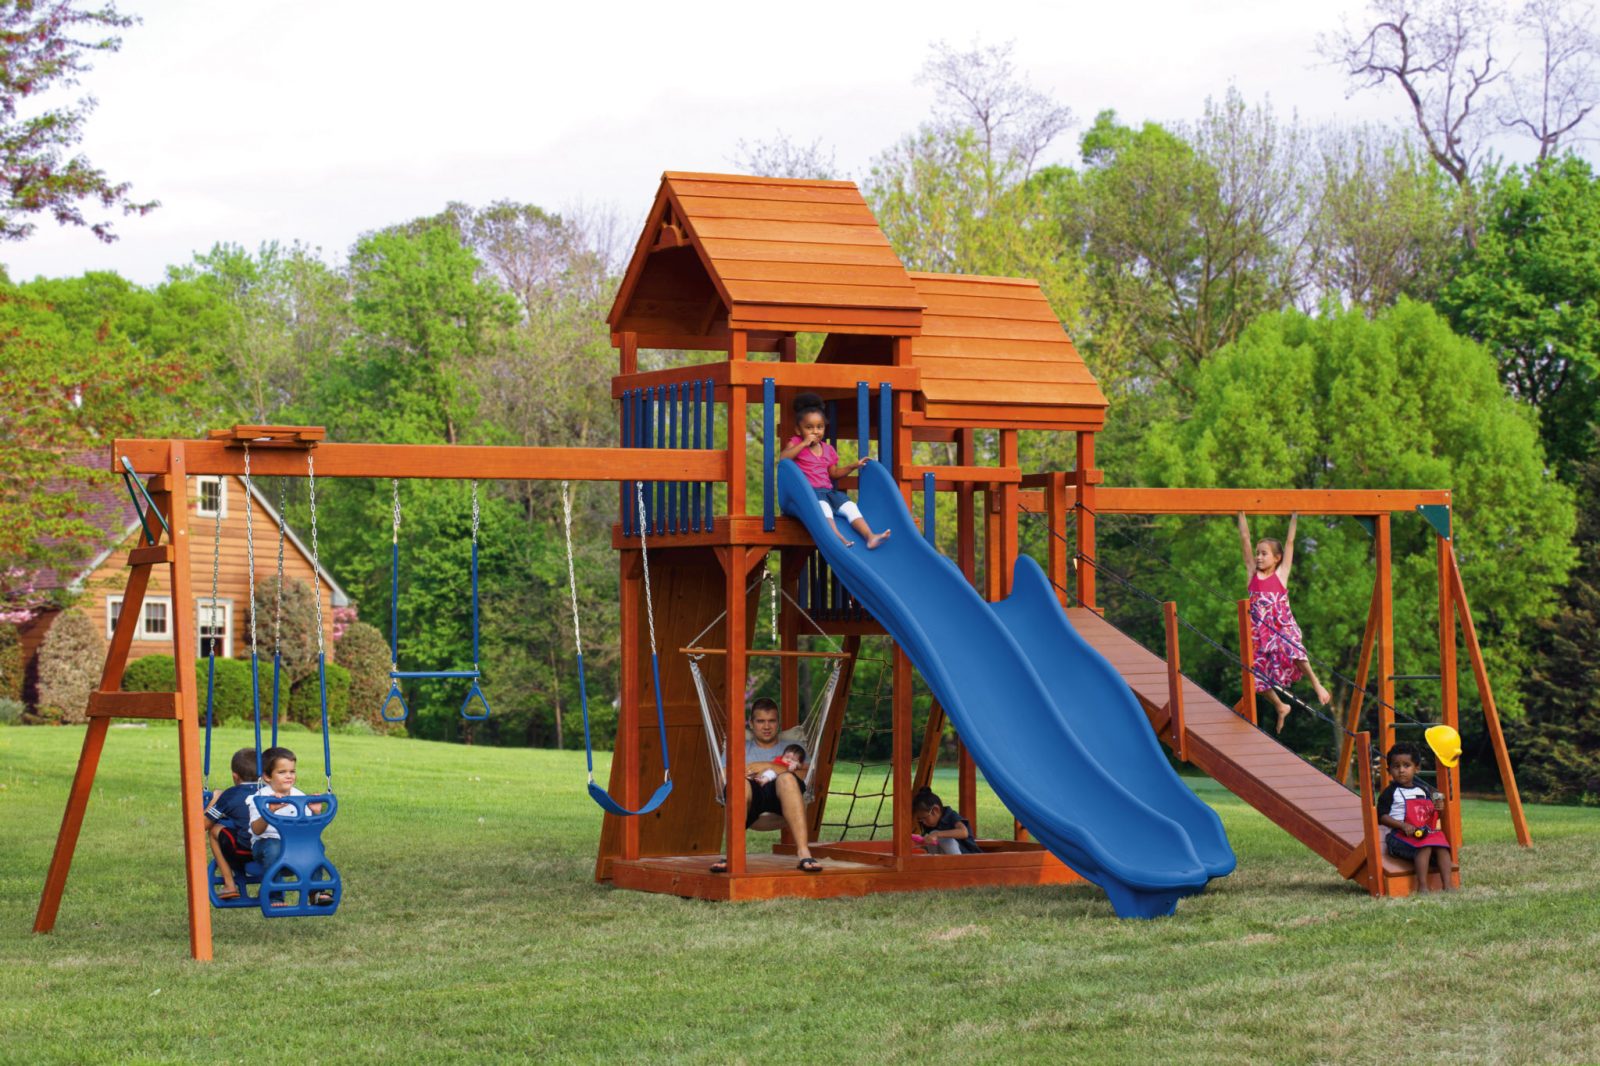 Backyard Playsets For Family Fun - Get A Custom Playset Today